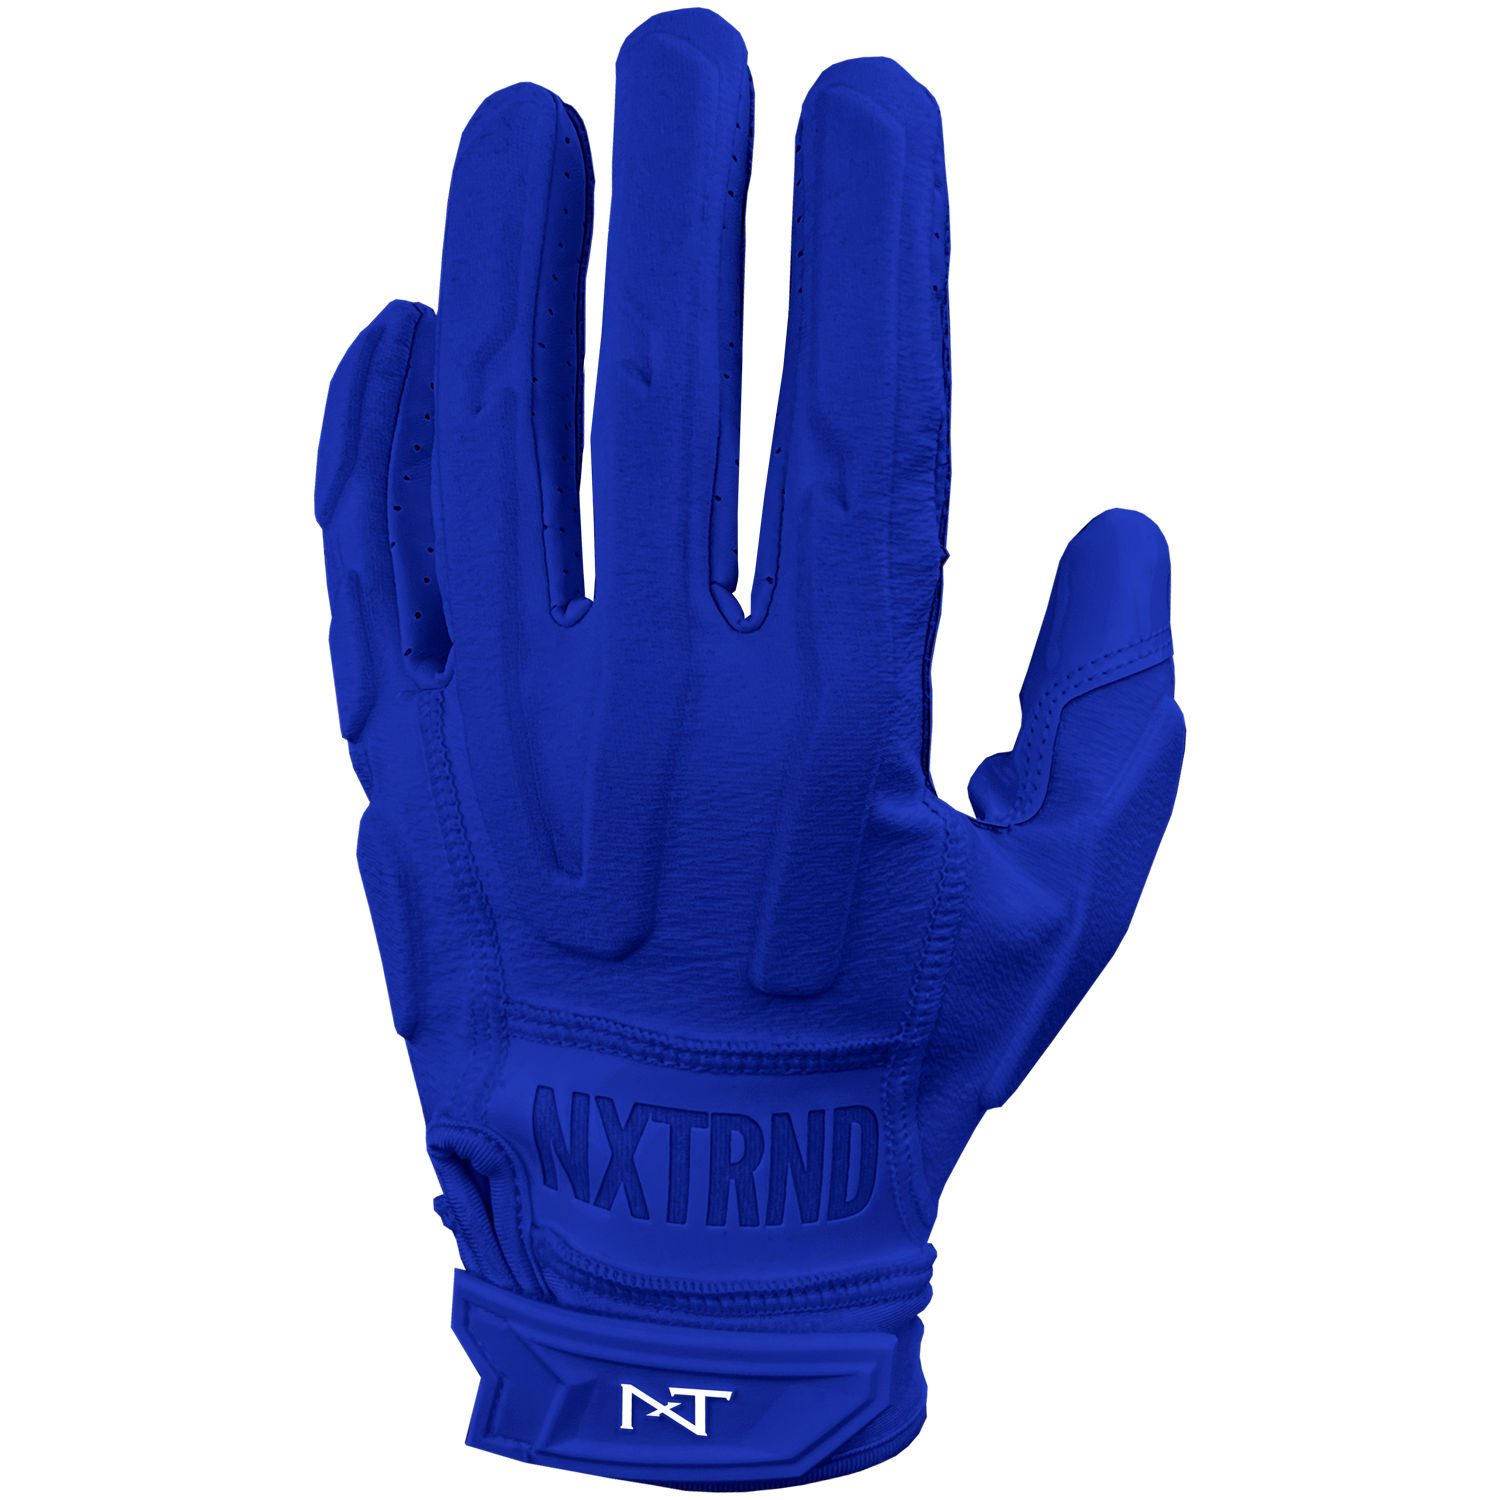  Nxtrnd G3 Padded Football Gloves, Sticky Padded Receiver Gloves,  Lineman Gloves (Black, Small) : Sports & Outdoors